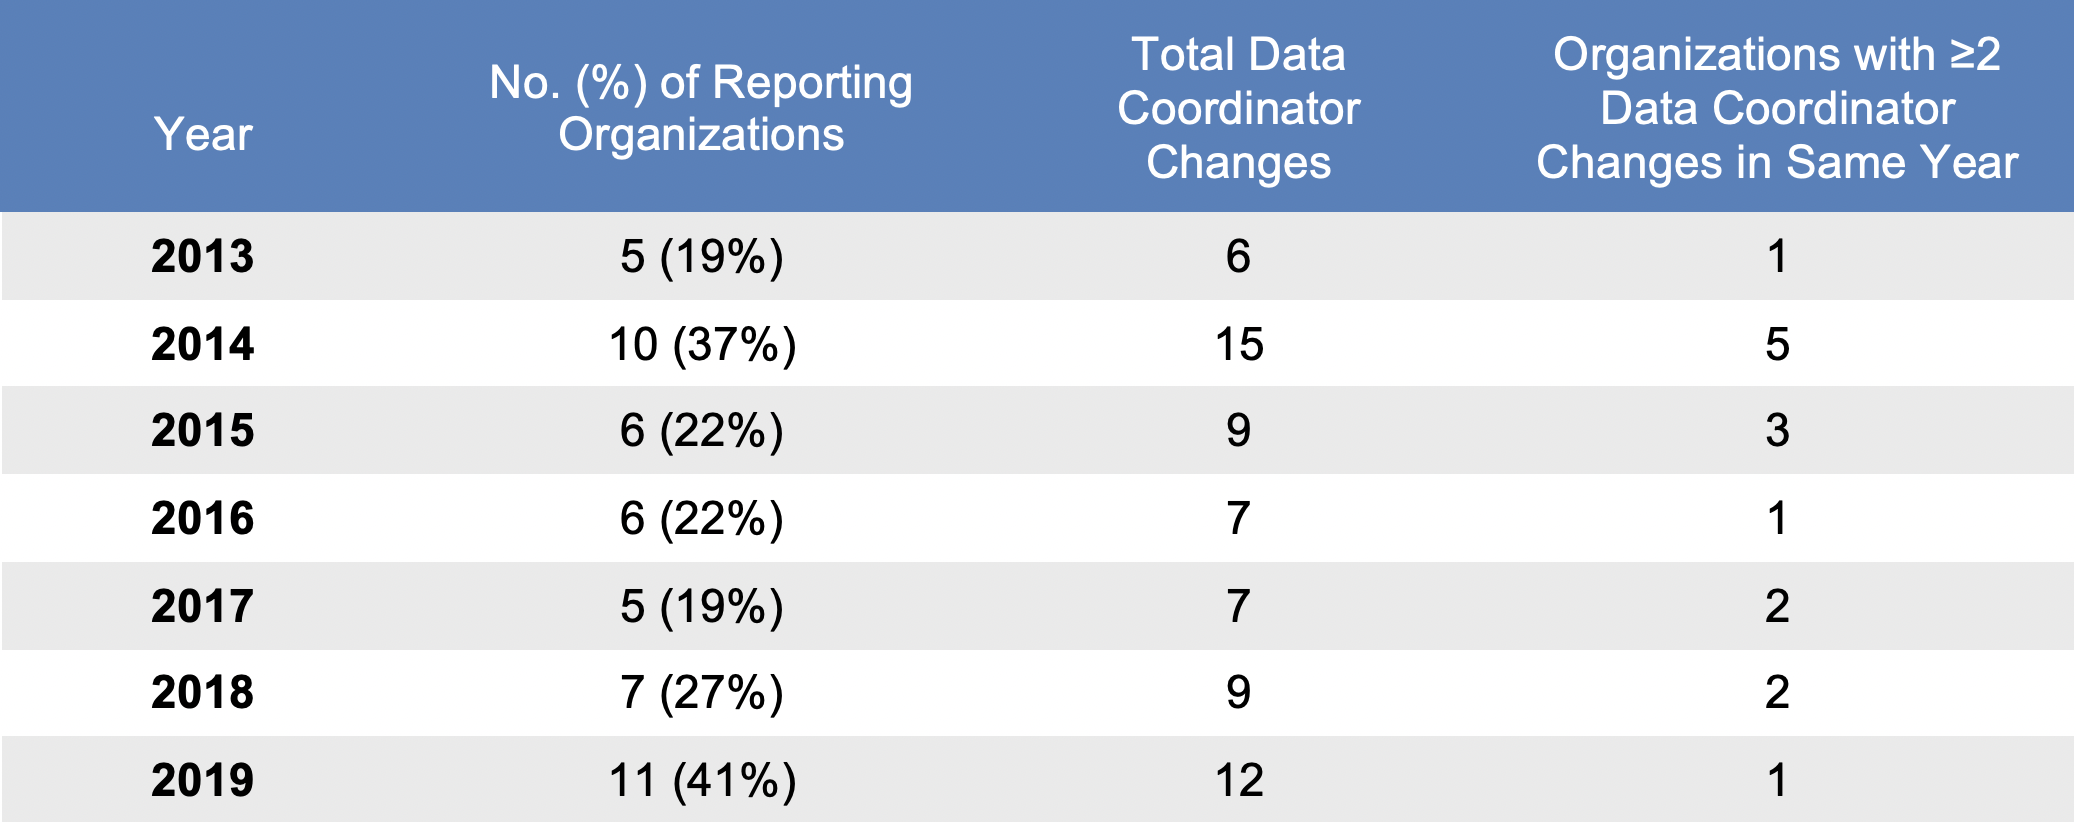 Data Coordinator Changes by Reporting Organization (2013-2019) infographic